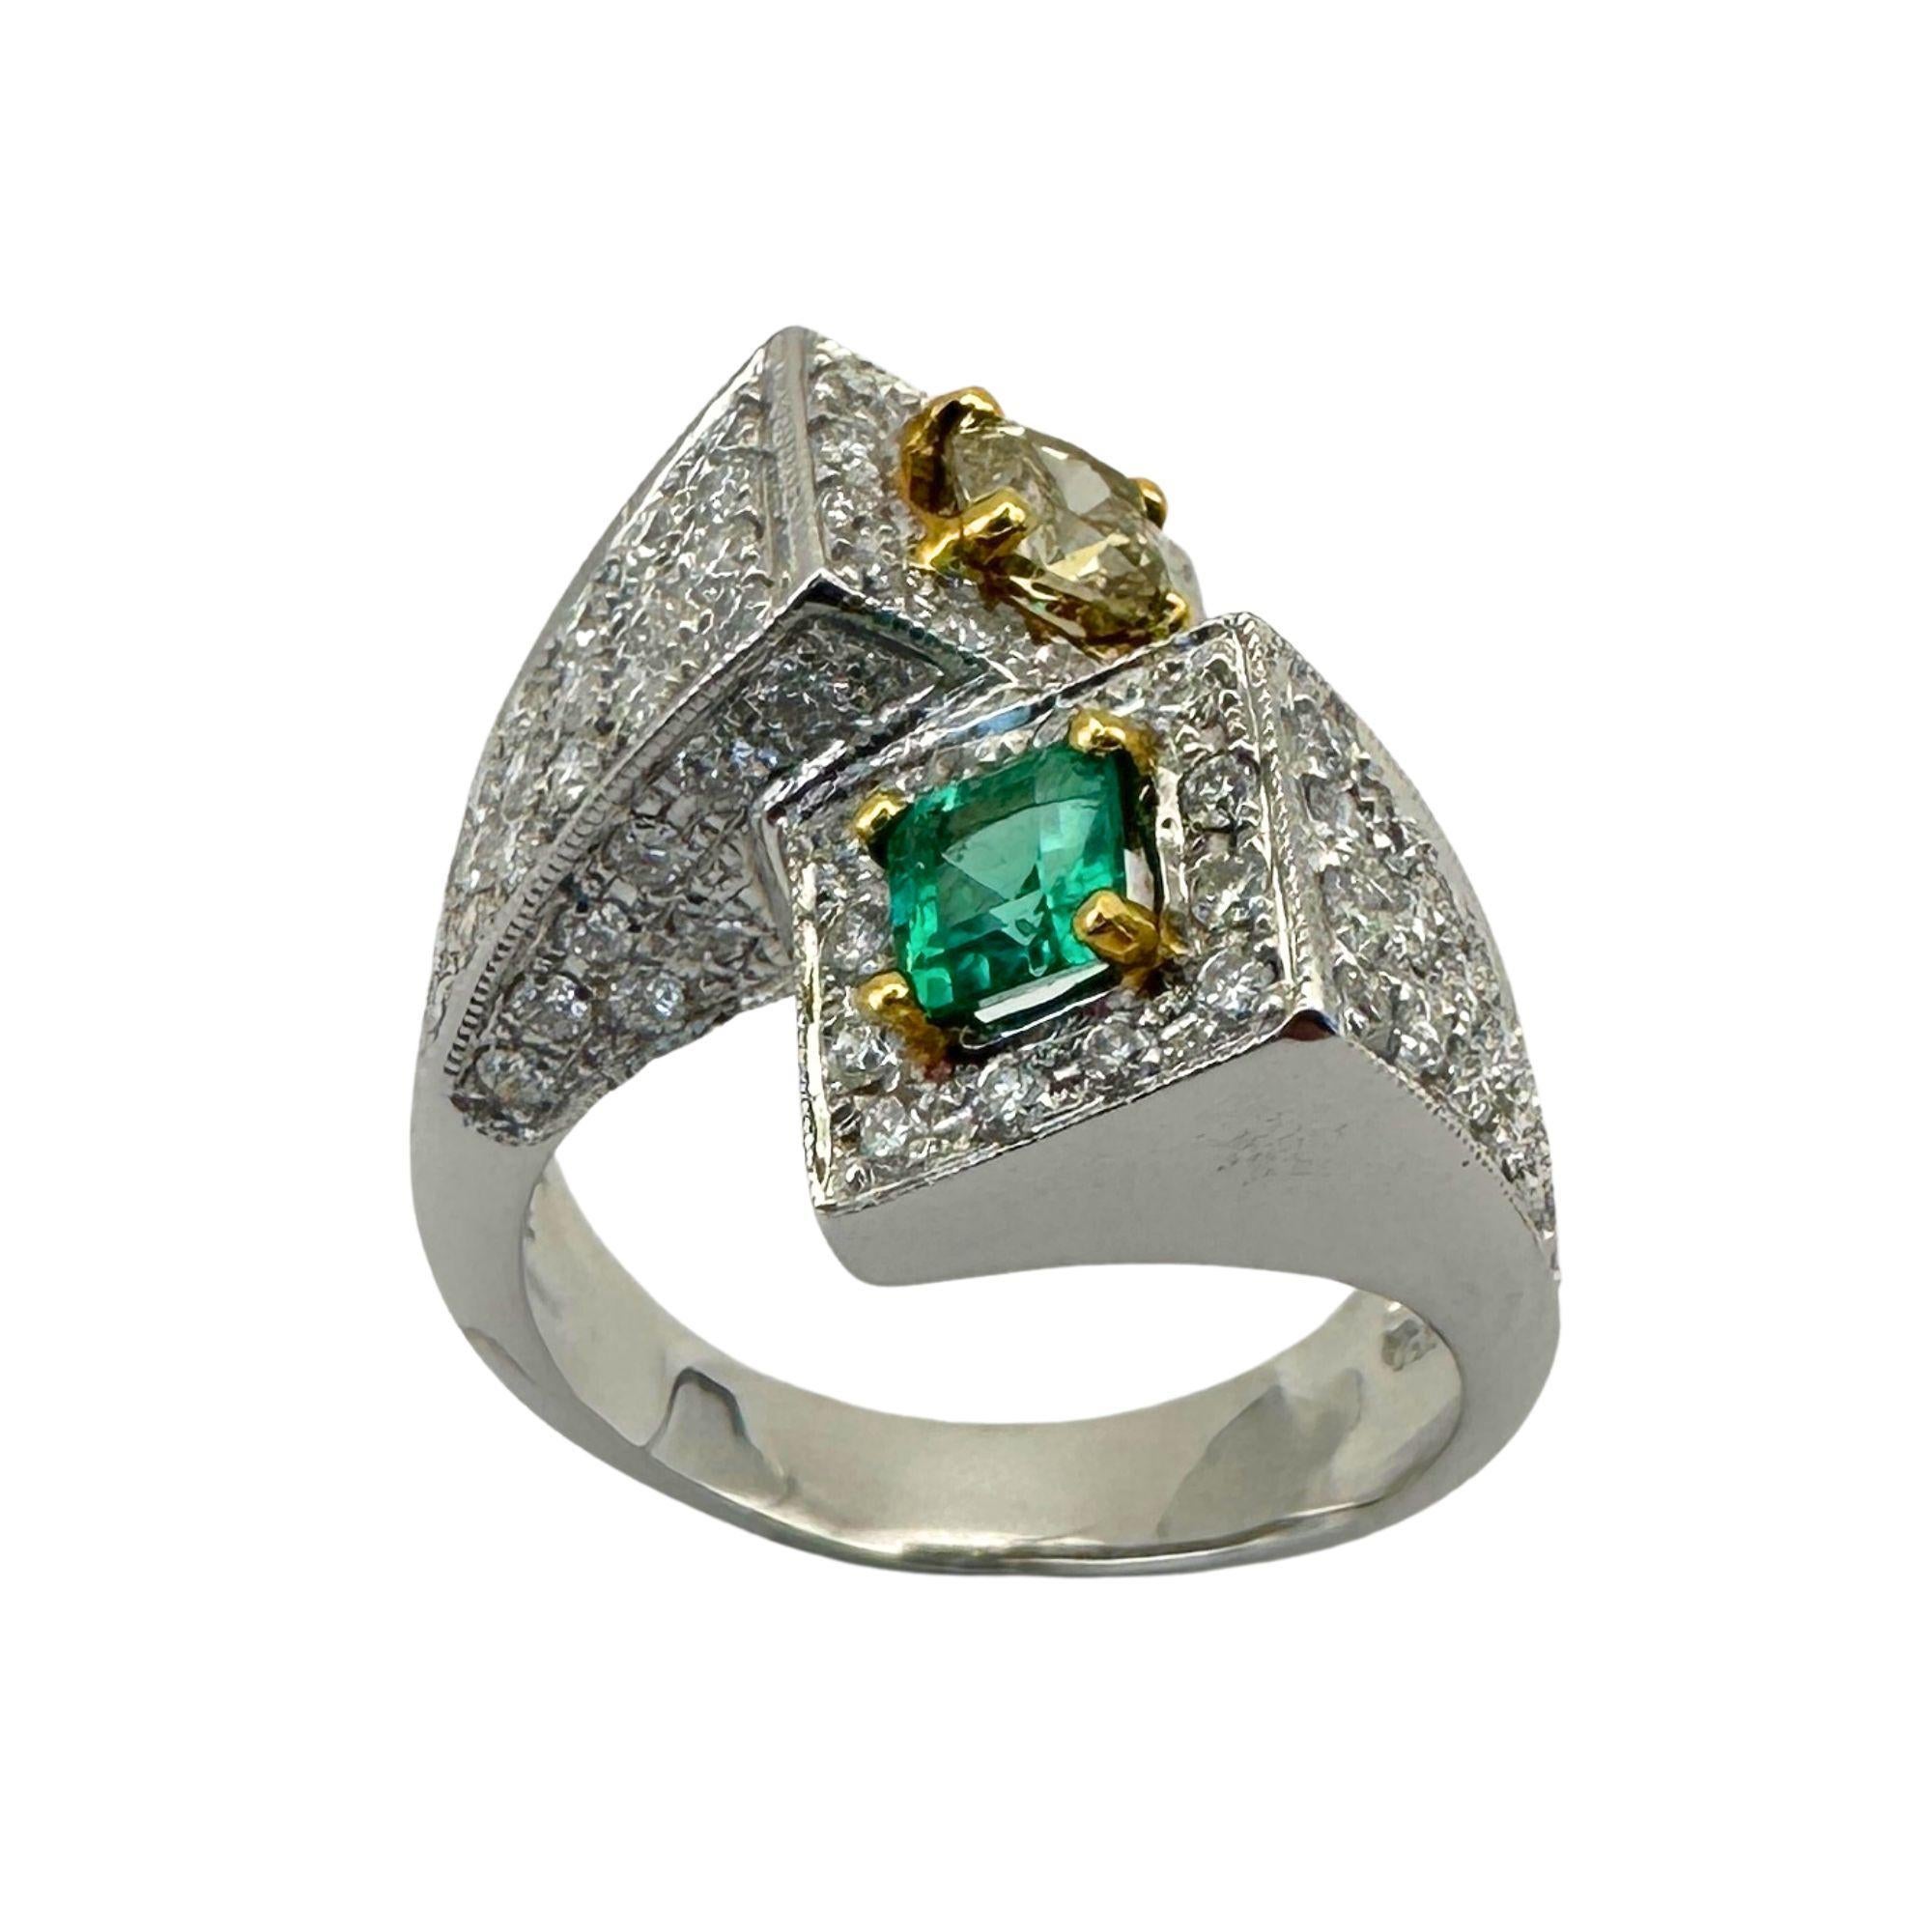 Indulge in luxury and elegance with our 18k White and Yellow Diamond and Emerald Ring. The stunning combination of diamonds and vibrant emerald gemstone make this ring a true statement piece. The emerald weighs 0.34 carats while the yellow diamond